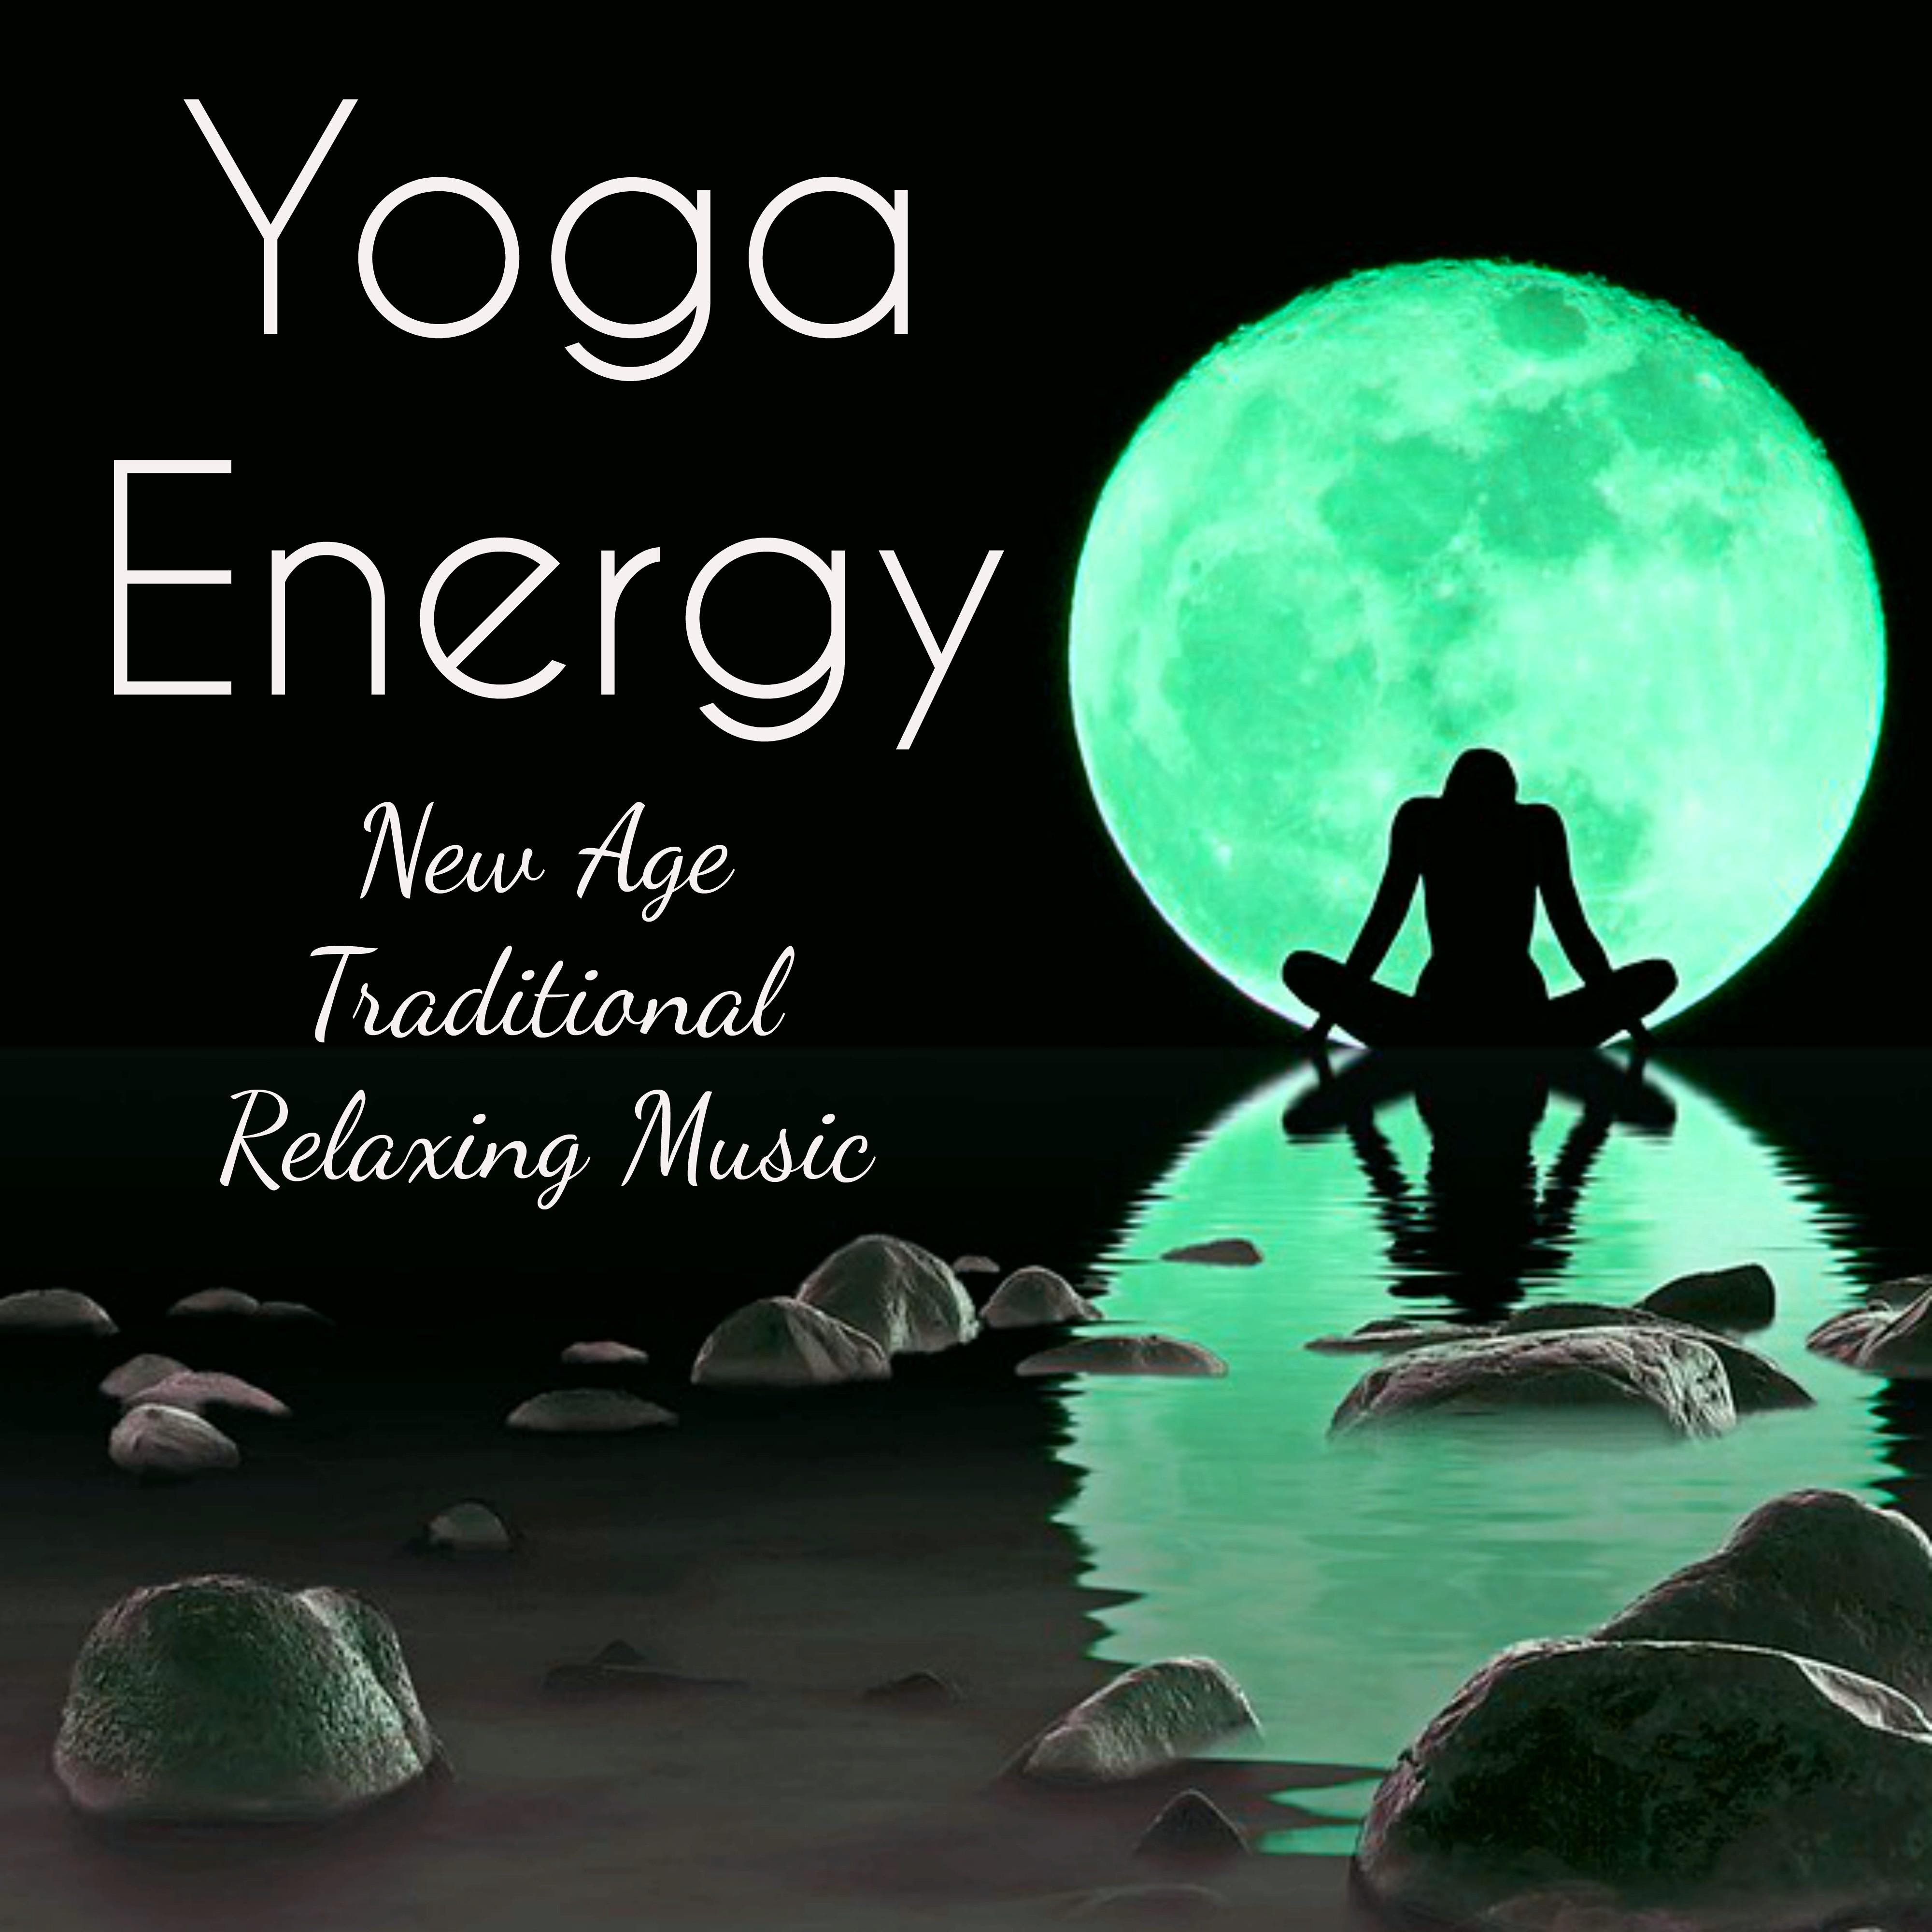 Yoga Energy - New Age Traditional Relaxing Music for Equilibrium Balance Brainwave Generator Yoga Chakras with Instrumental Nature Healing Sounds